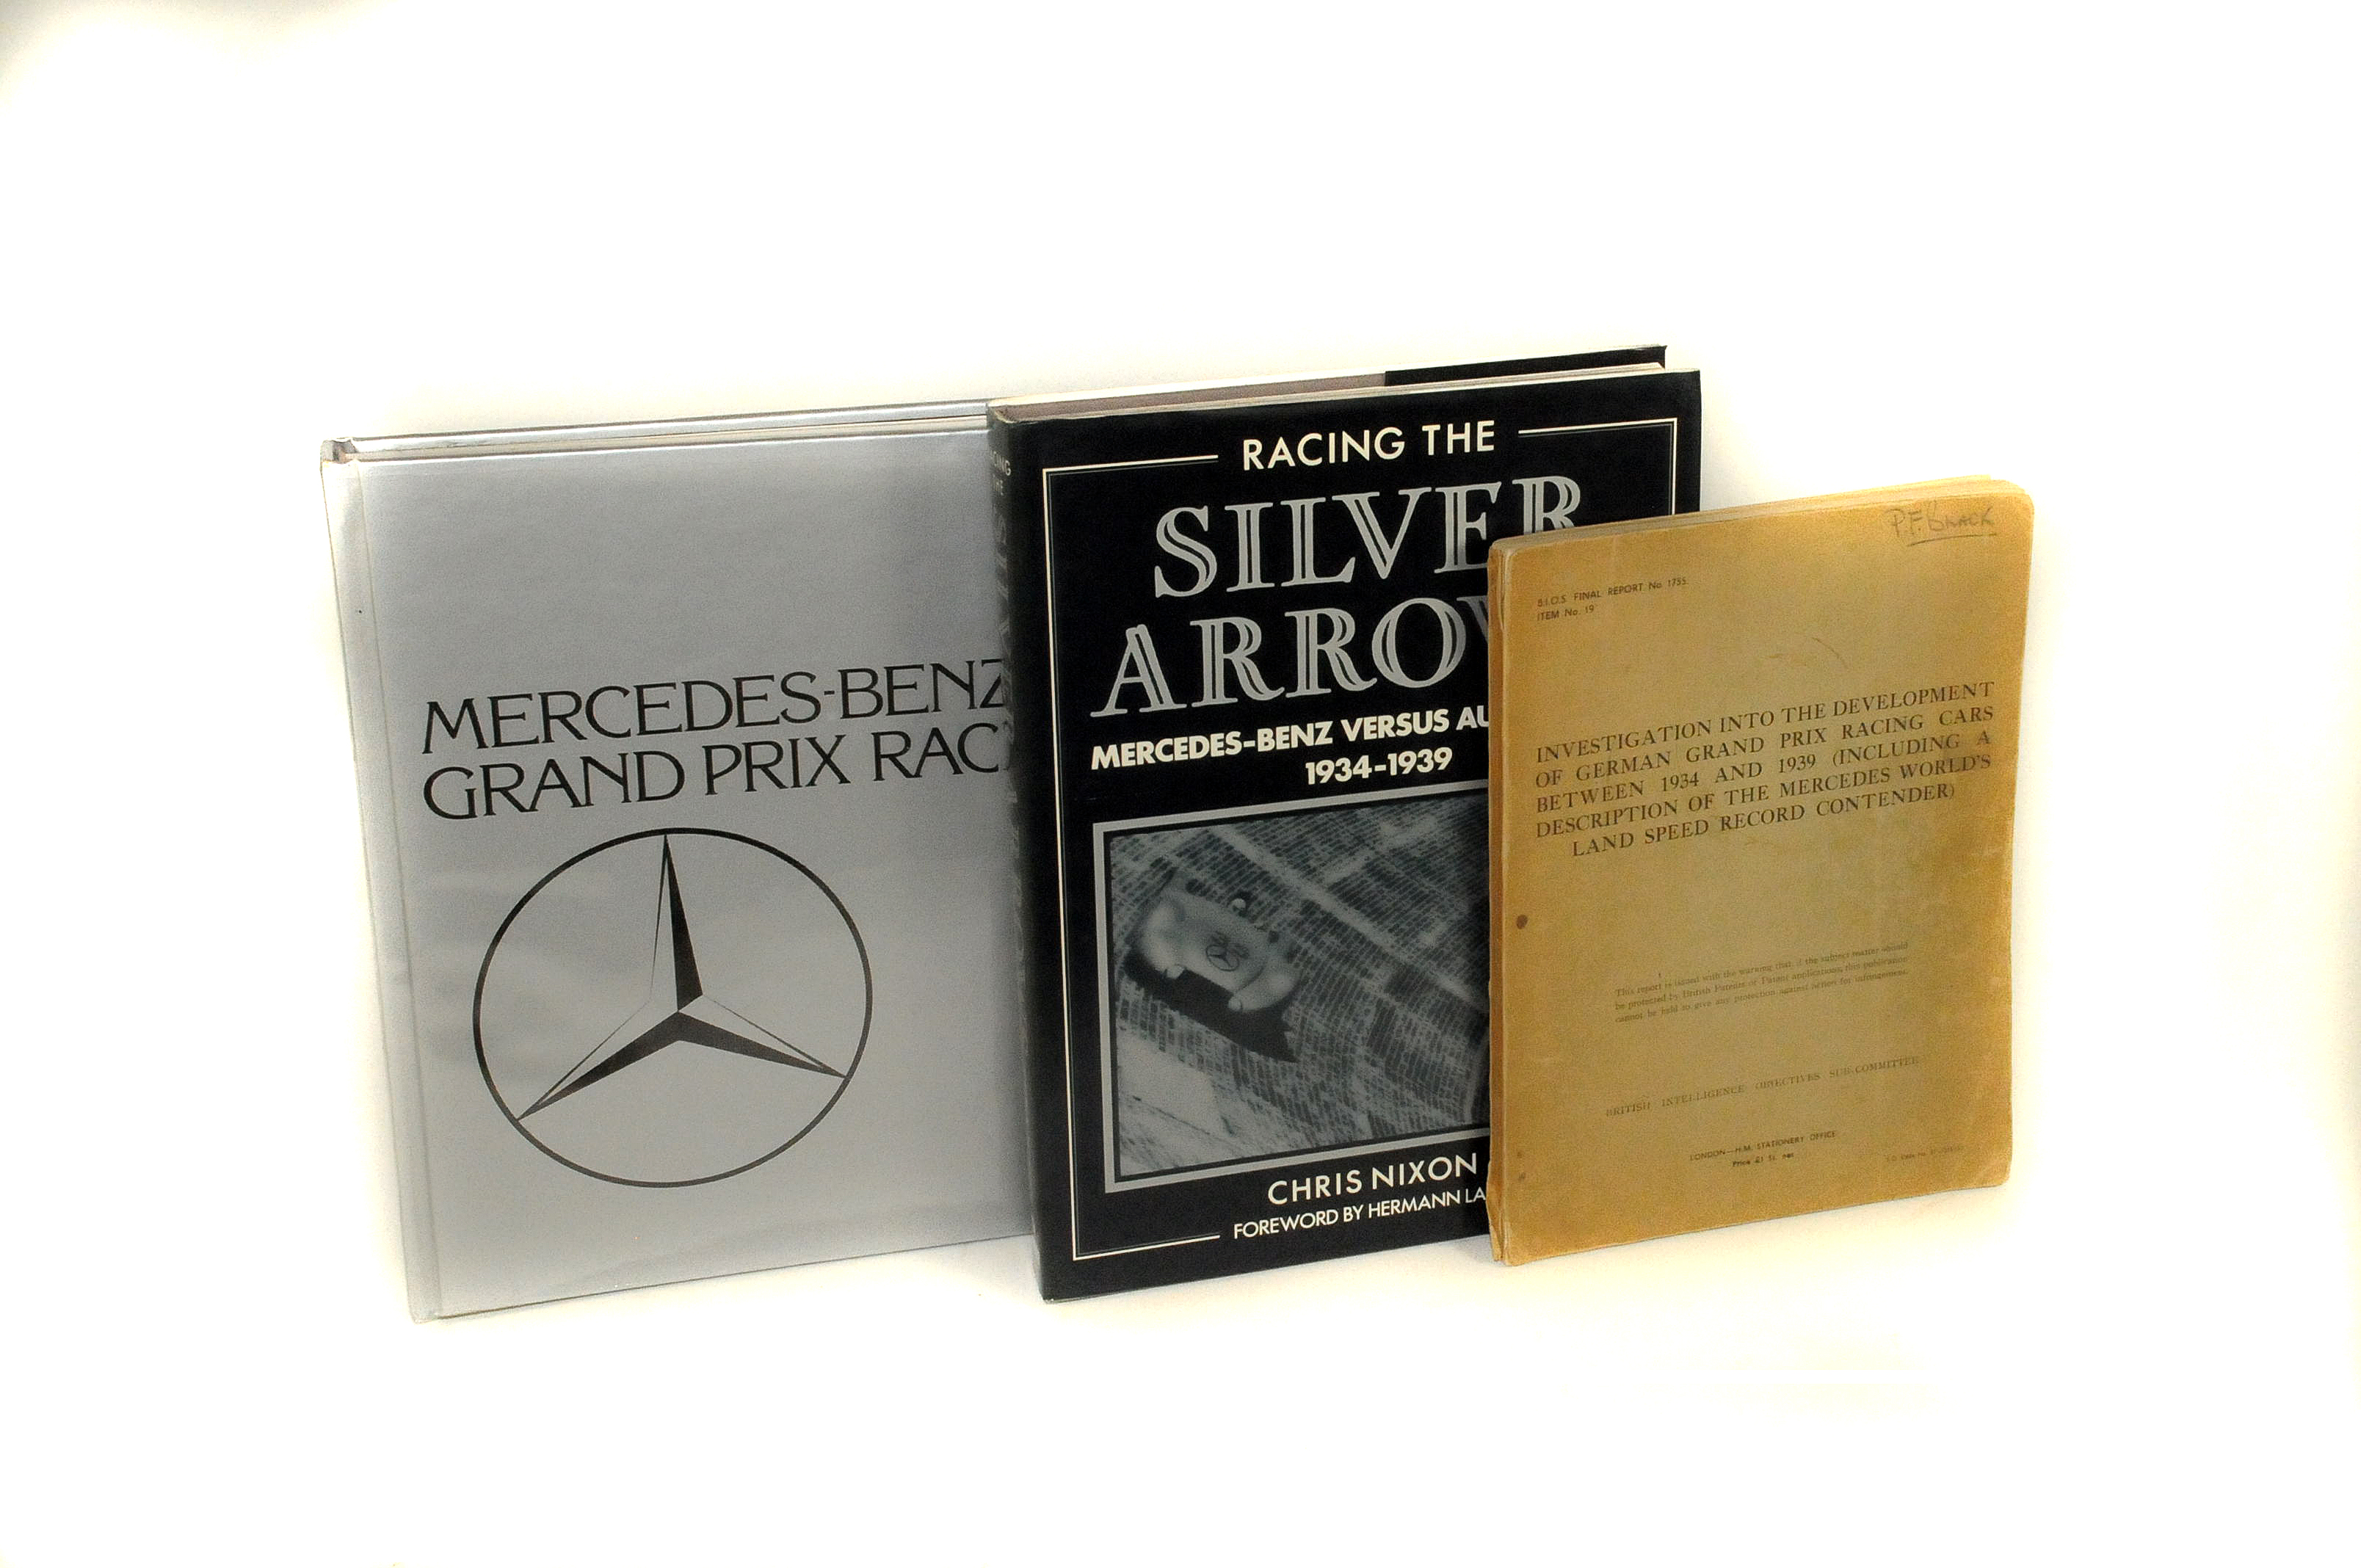 Mercedes-Benz Grand Prix Racing 1934-1955 (Monkhouse) White Mouse/New Cavendish publication dated